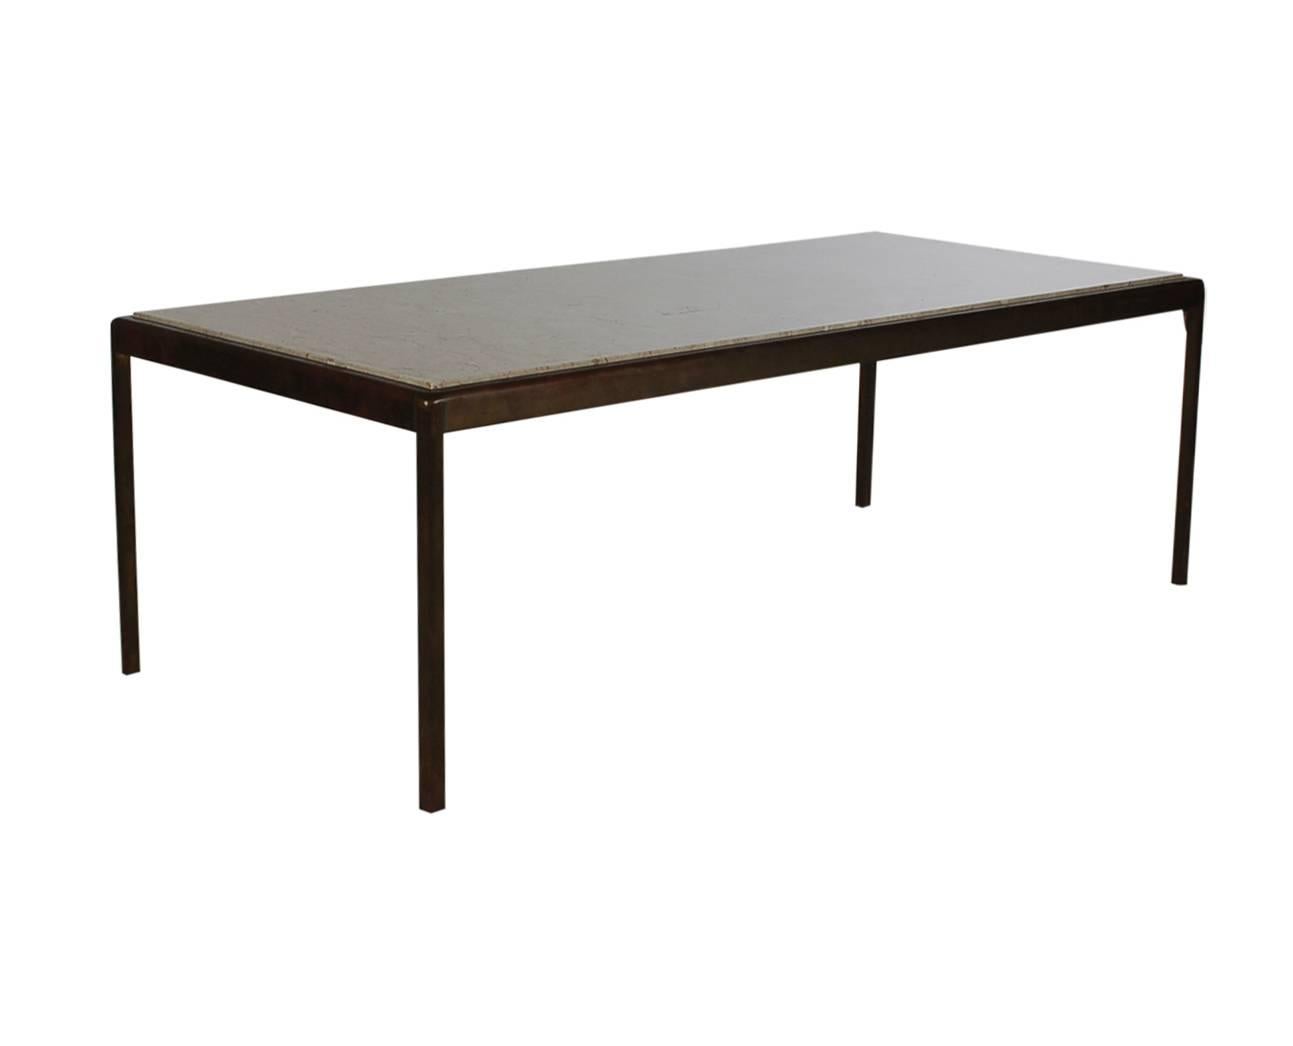 An incredibly heavy and well made coffee table in the manner of Florence Knoll. It features a solid bronze heavy frame with an inlaid Perlato marble.